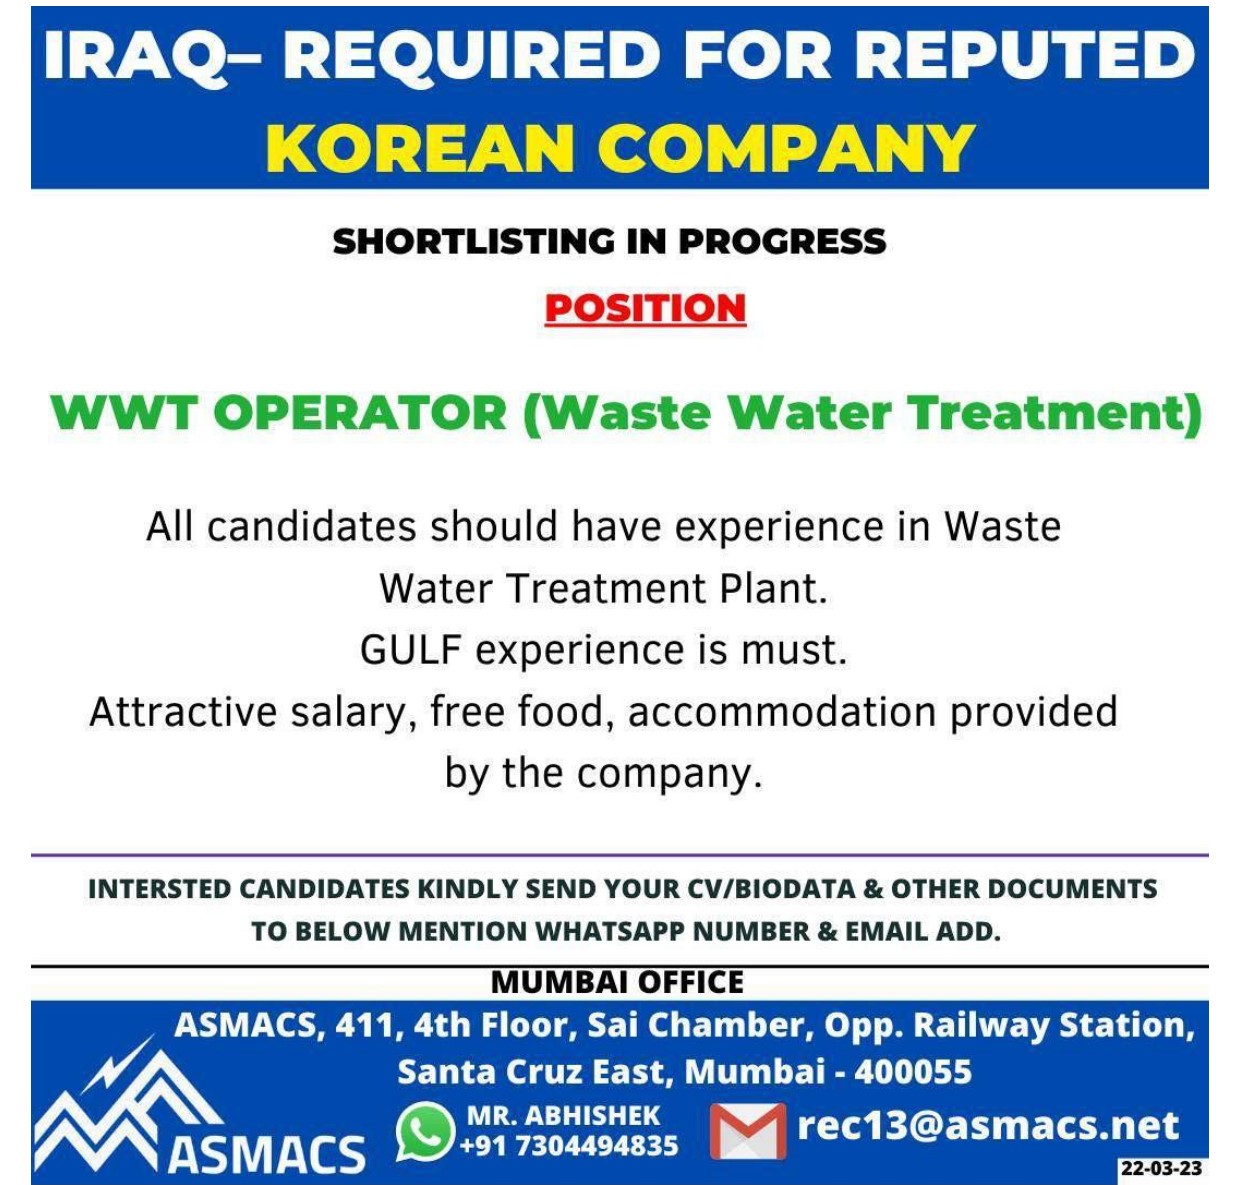 Required for Reputed Korean Co. Iraq